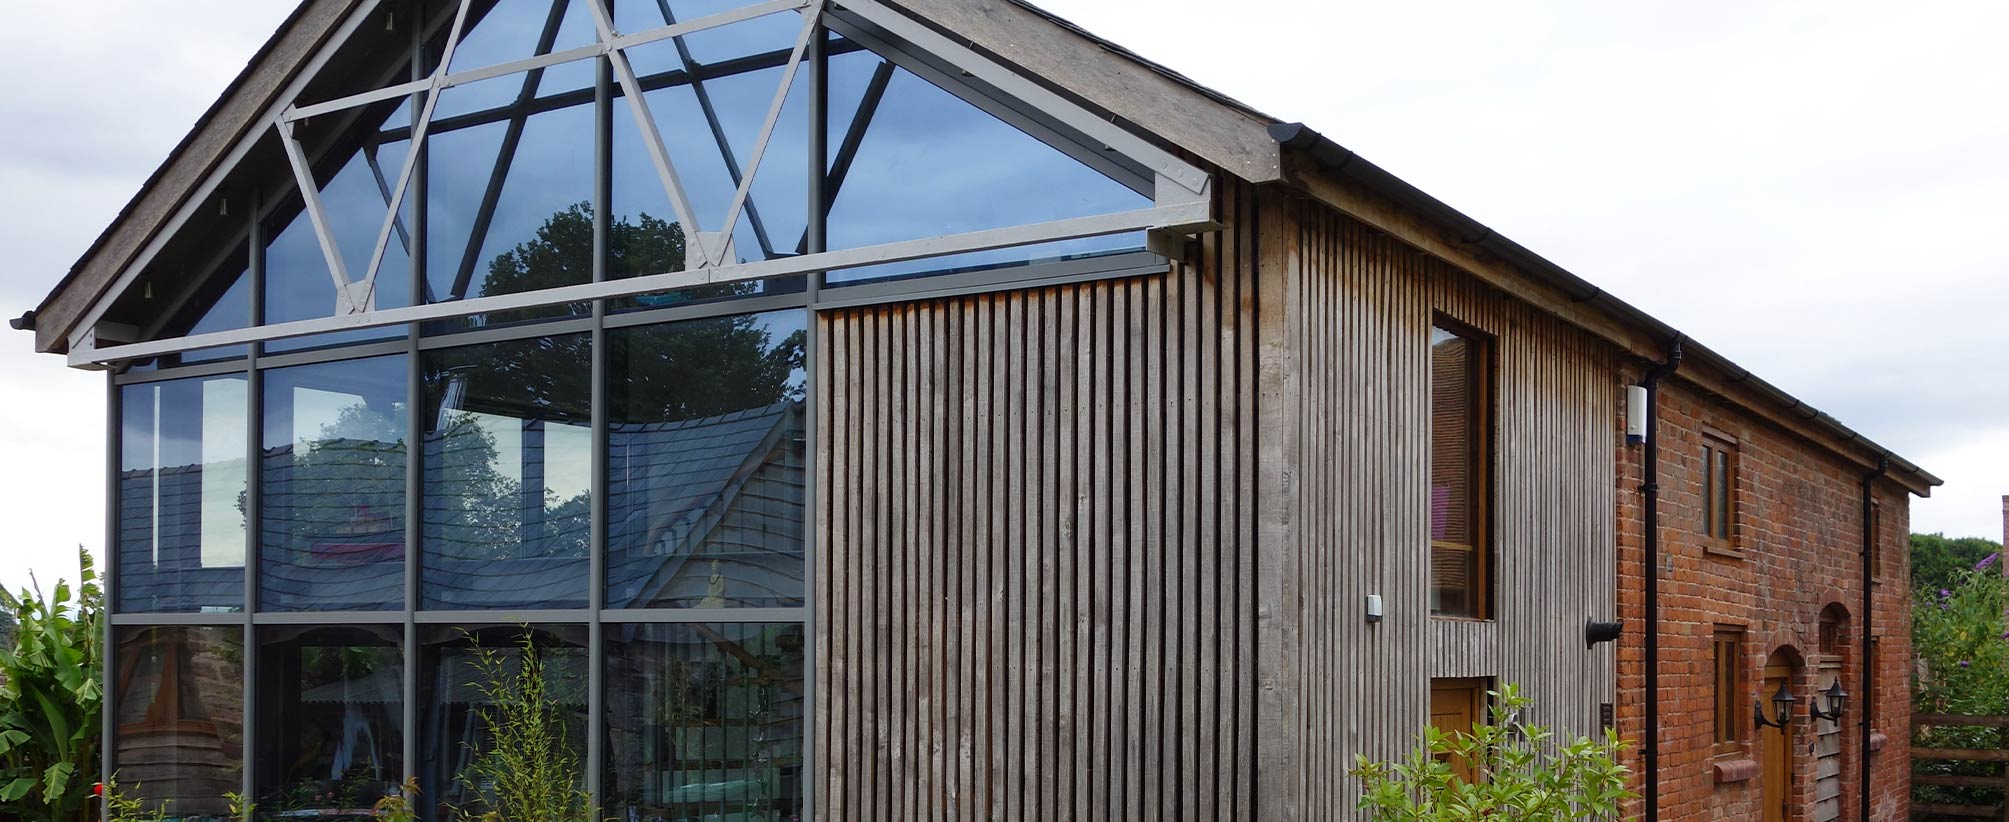 Contemporary barn conversion in Herefordshire